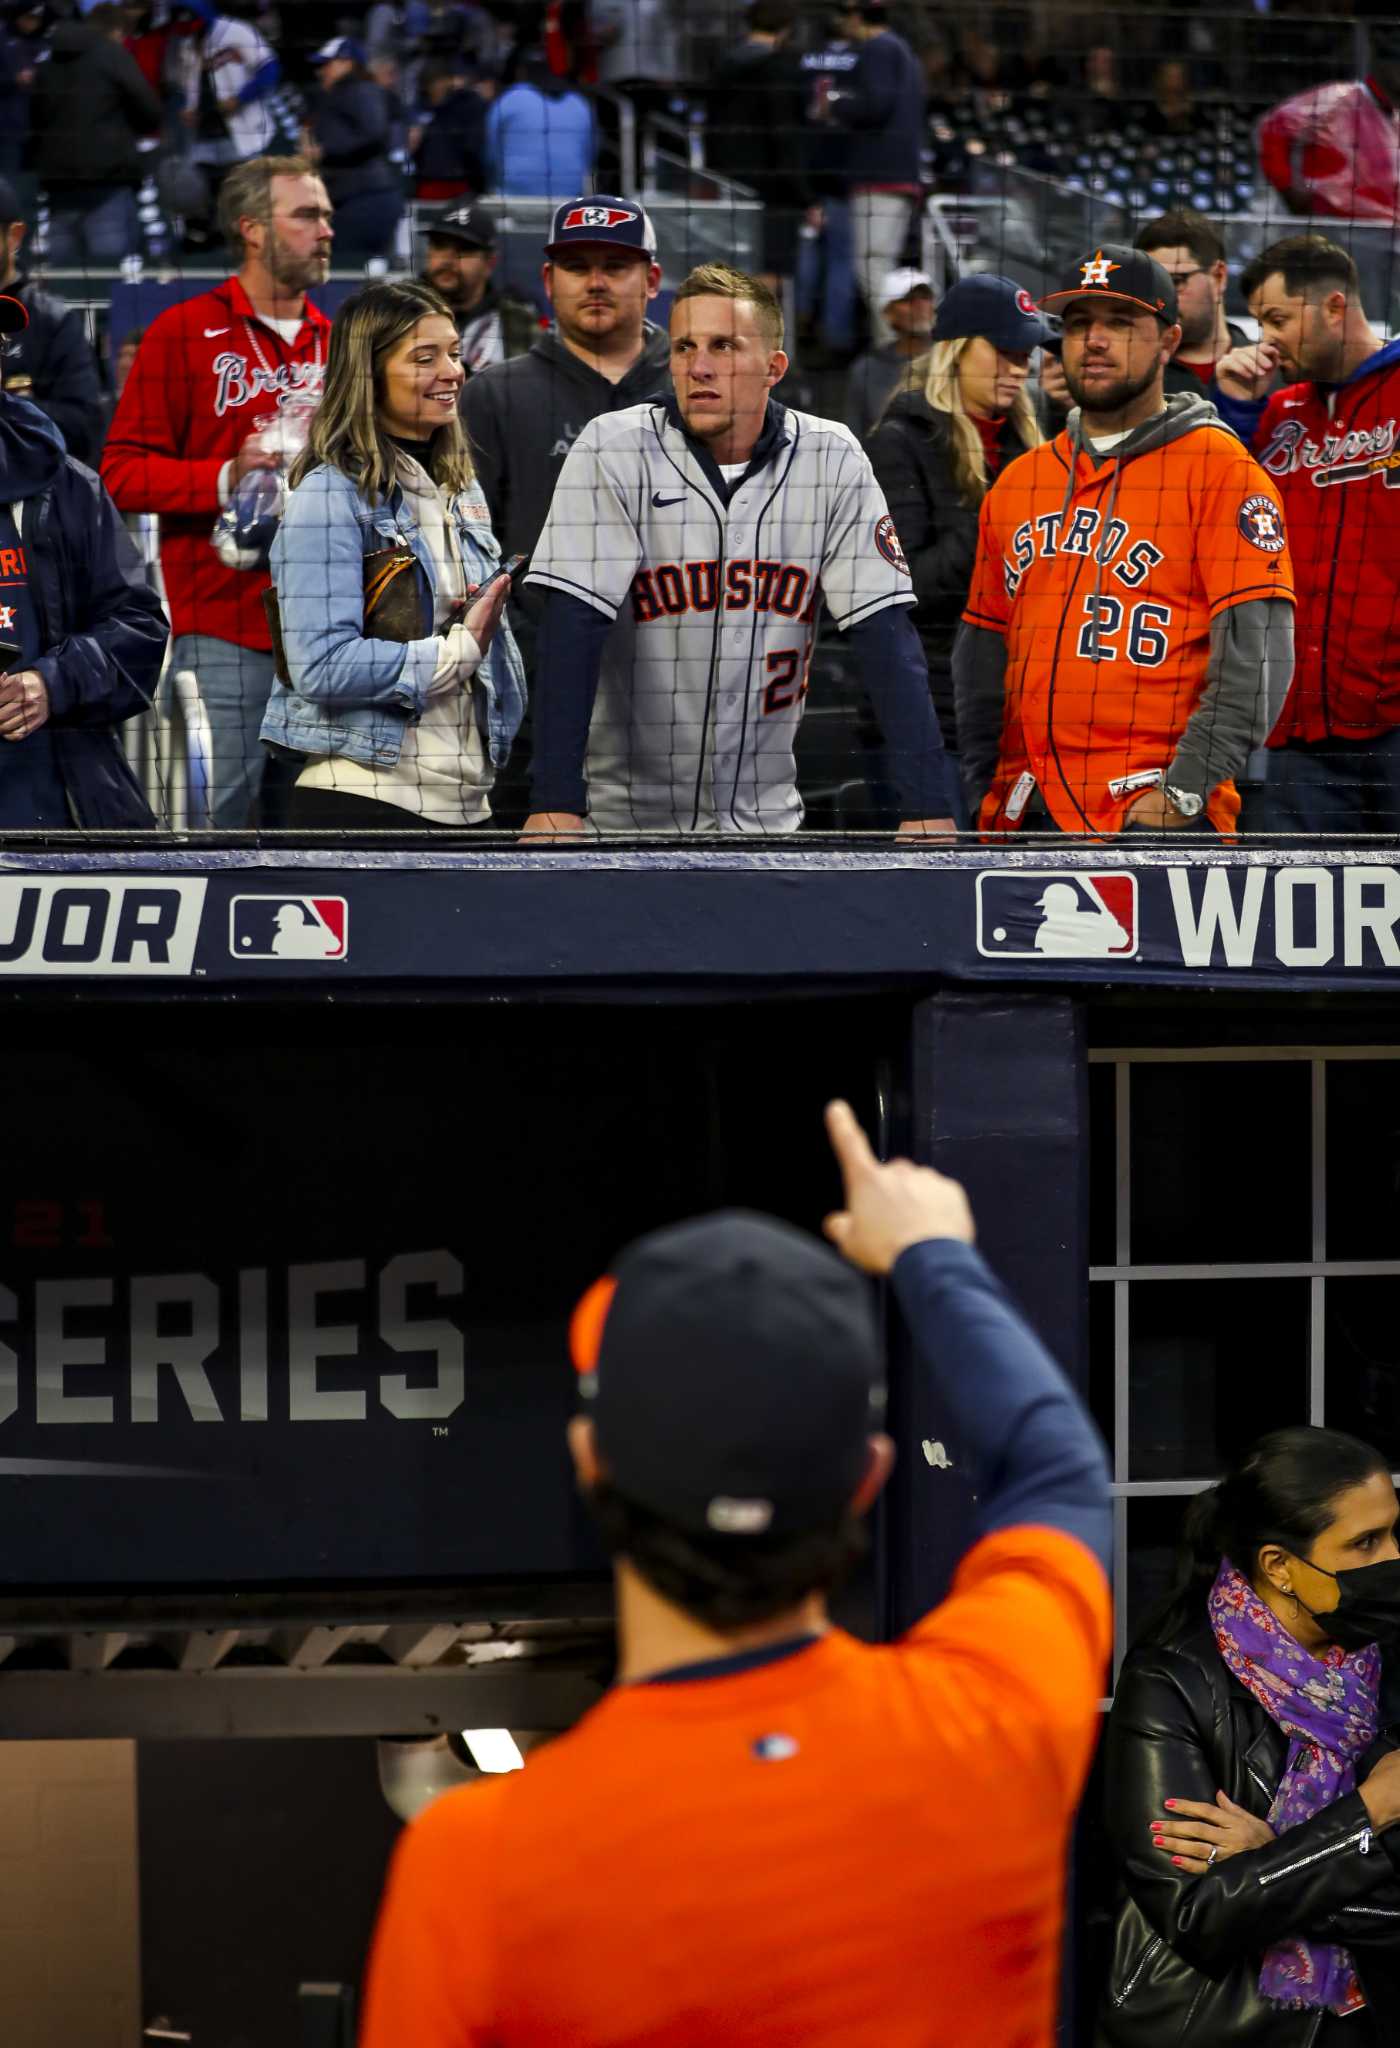 Myles Straw wears Astros jersey at Game 4 of World Series